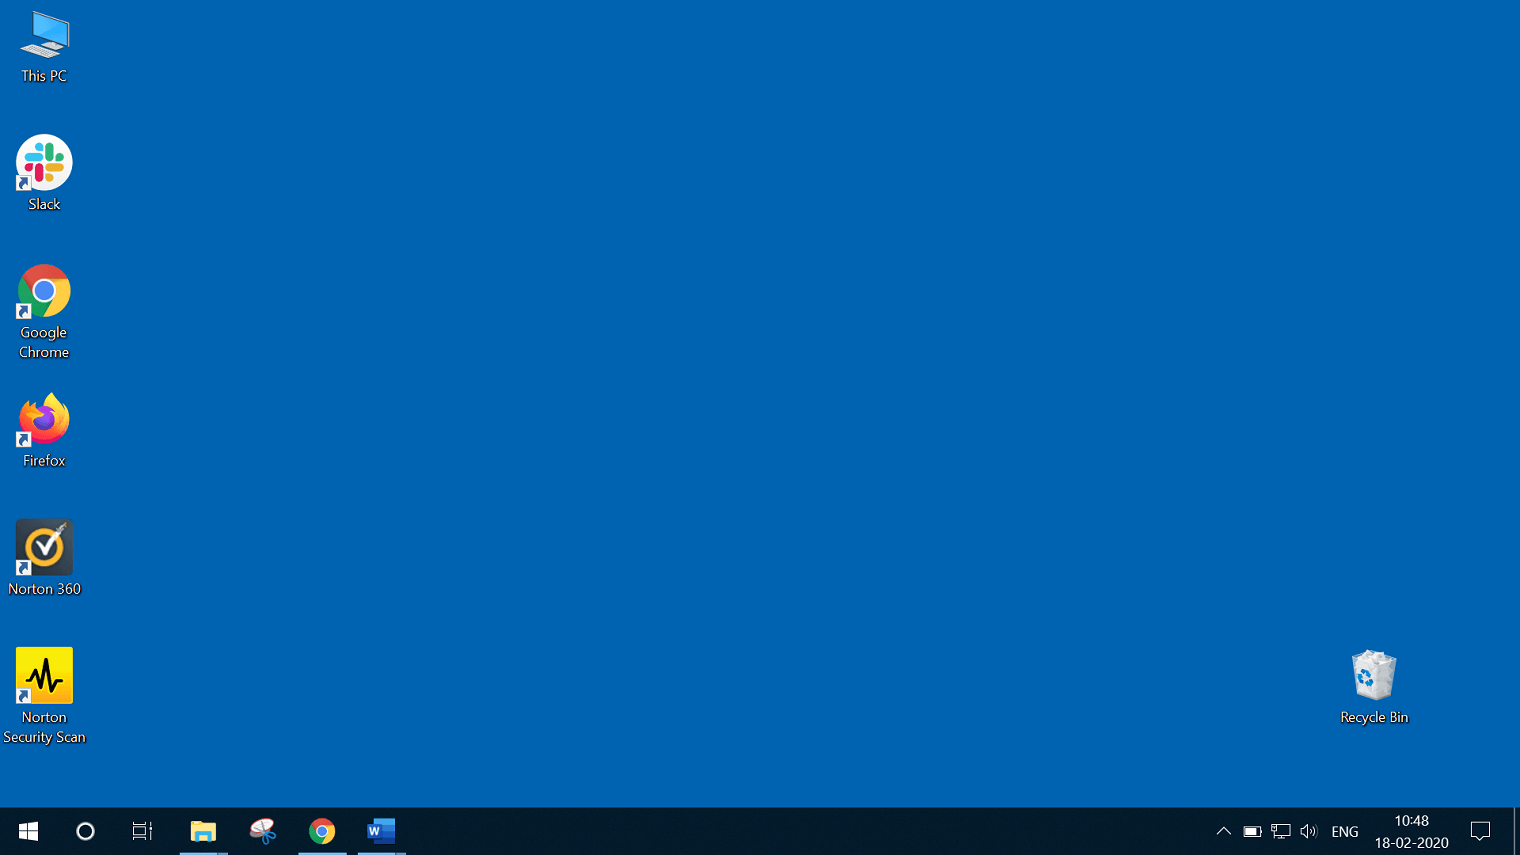 Hold the left mouse button and drag the taskbar to its new position wherever you want, like left, right, top, or bottom of the screen. Now, release the mouse button, and the taskbar will come to its new or default position on the screen(whatever you choose).